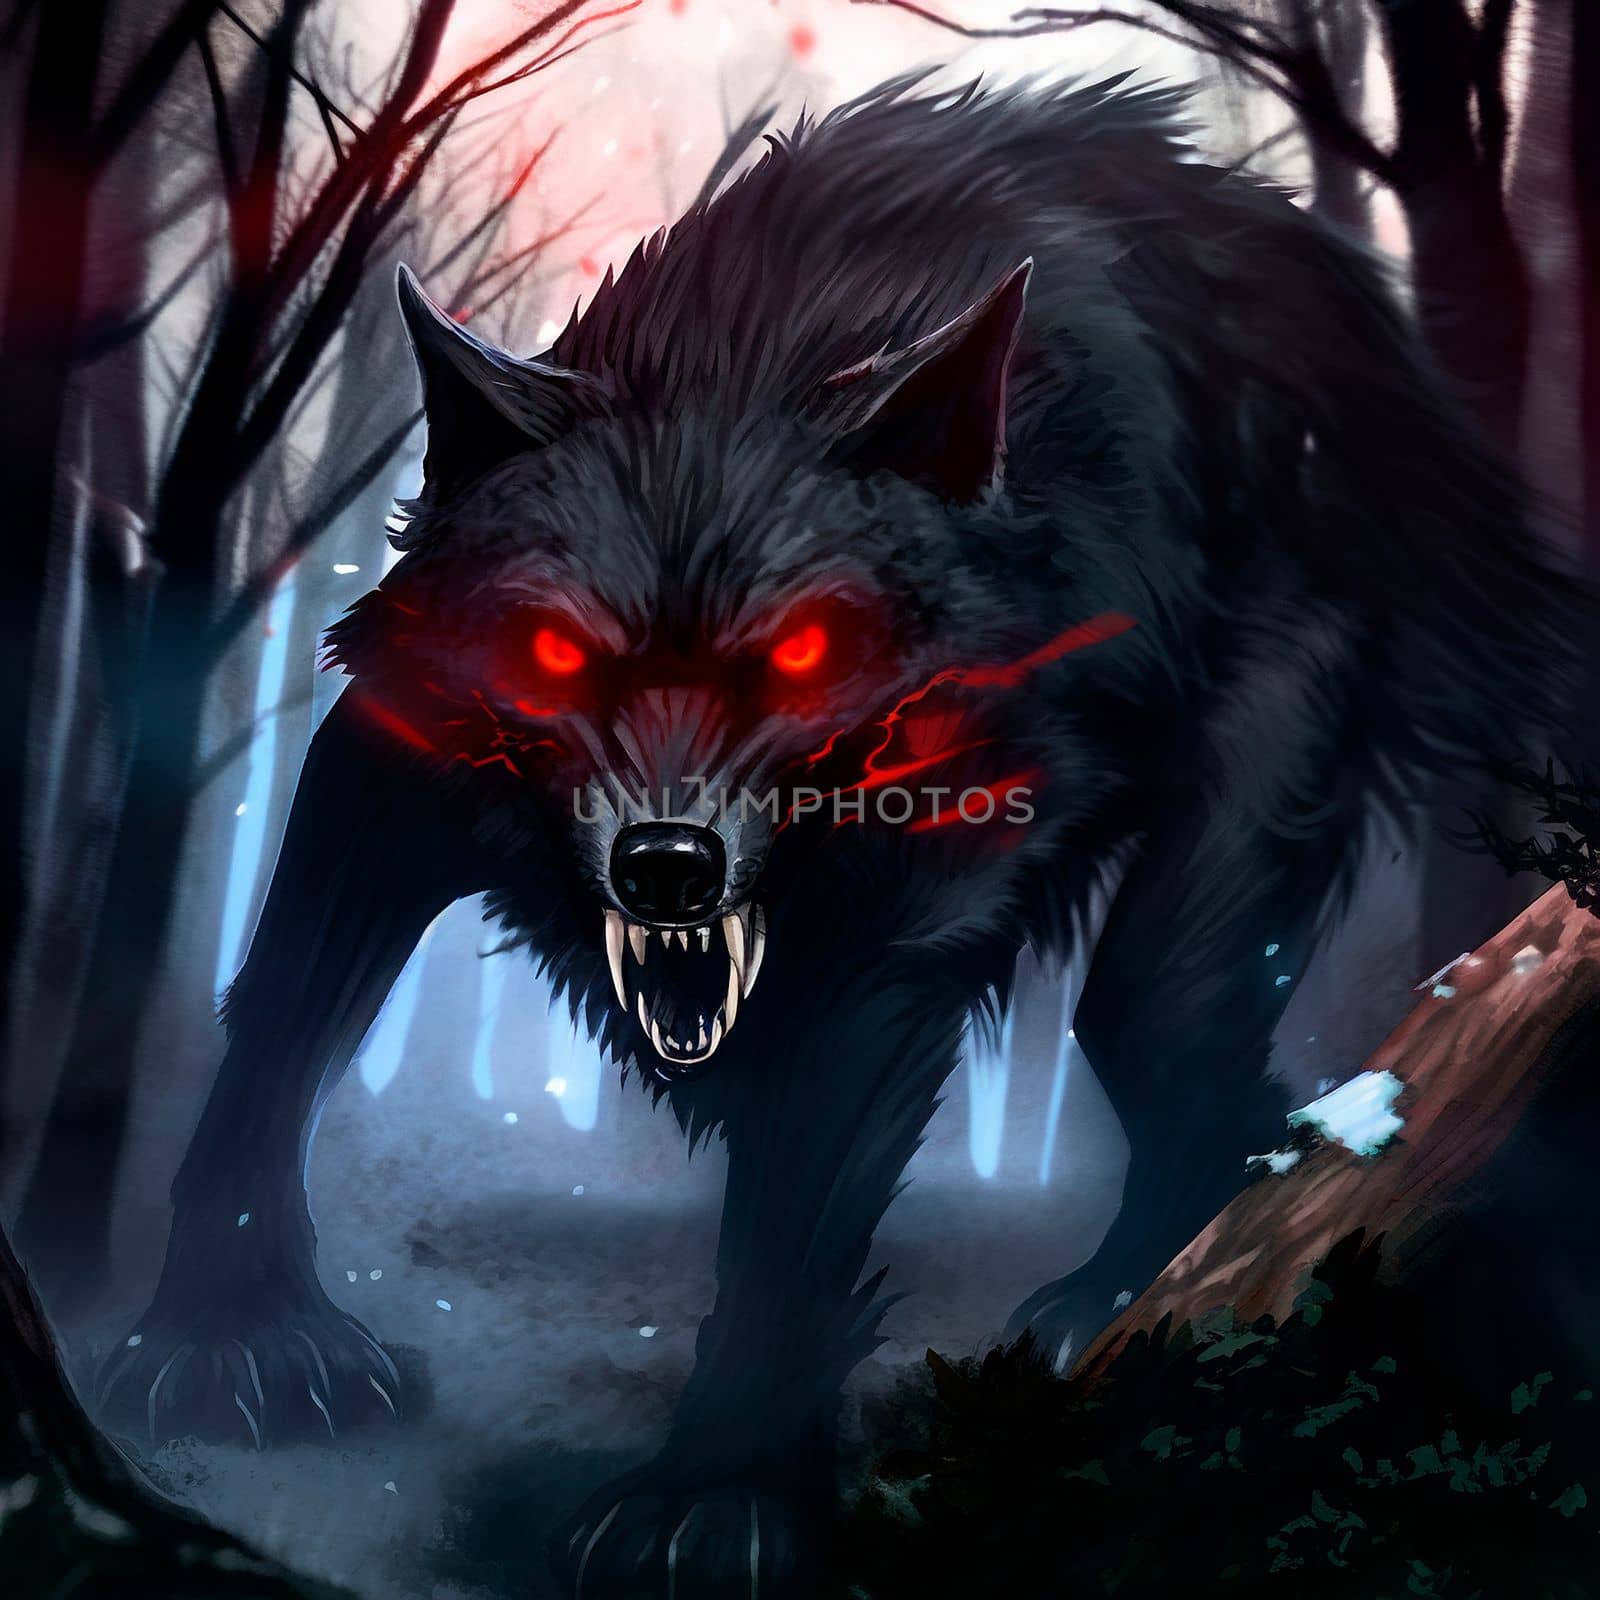 A big monster with red eyes in a mystical forest by NeuroSky